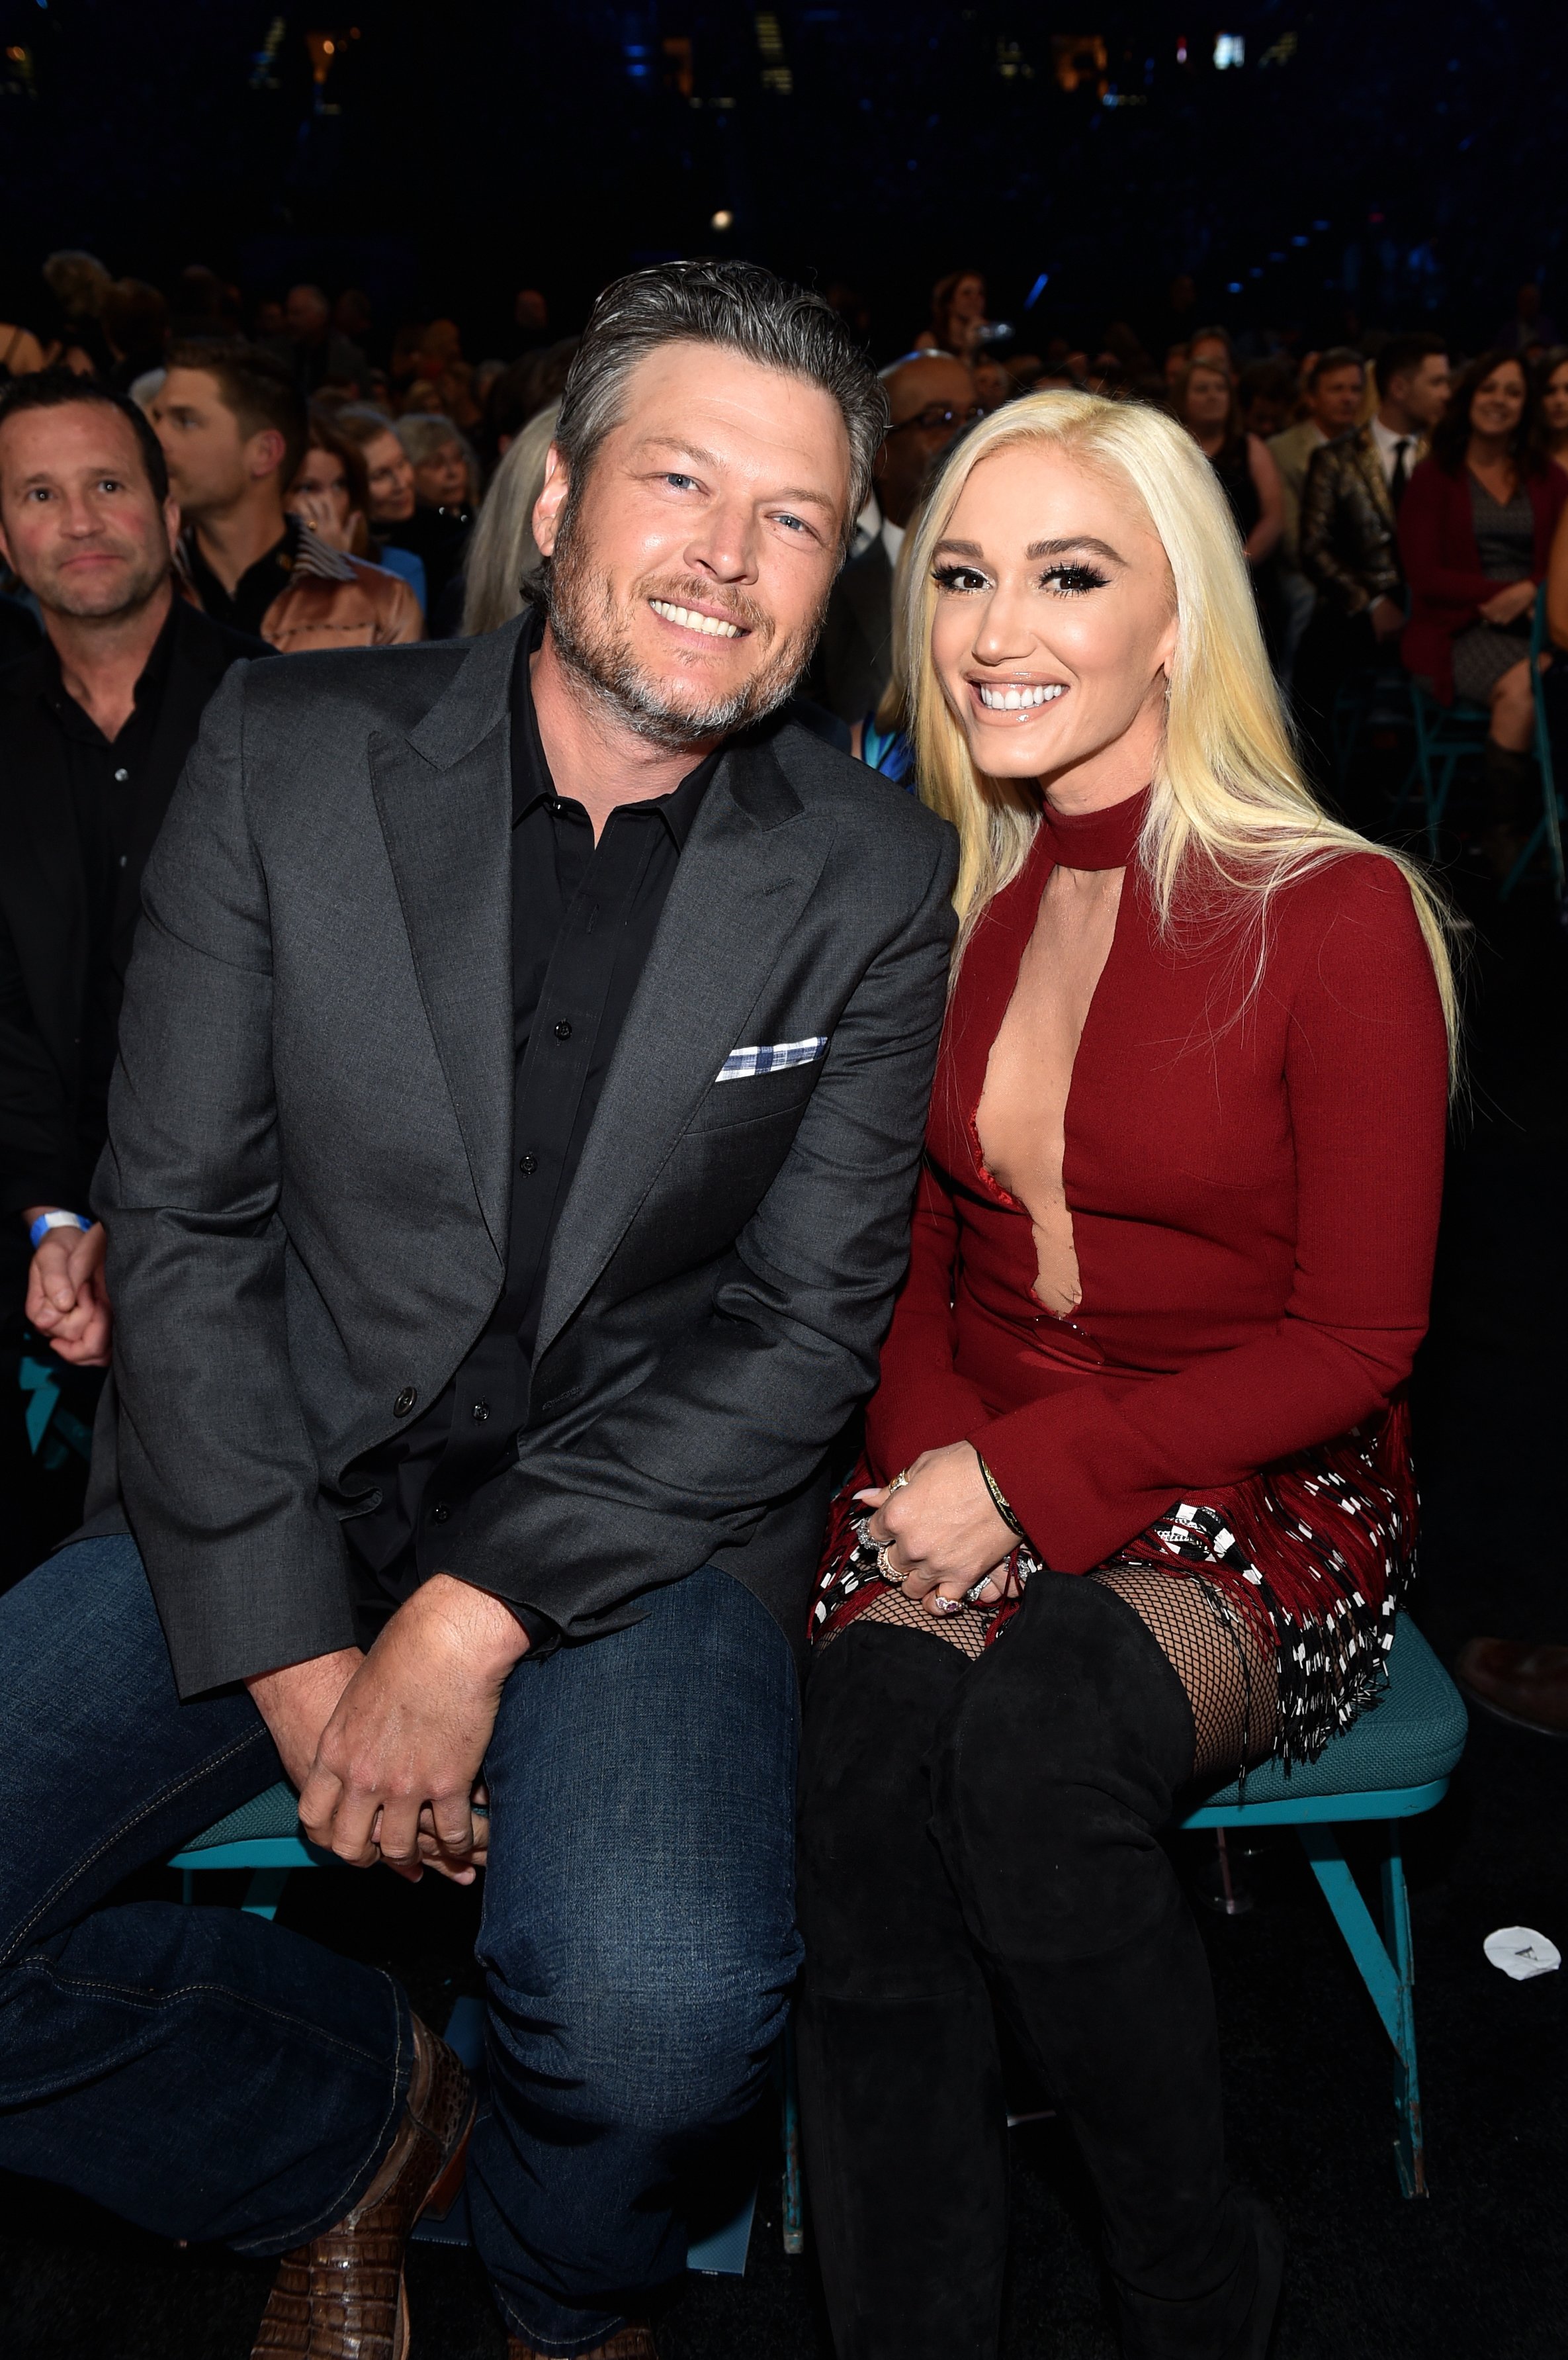 Blake Shelton and Gwen Stefani at the 53rd Academy of Country Music Awards at MGM Grand Garden Arena on April 15, 2018 in Las Vegas, Nevada | Photo: Getty Images